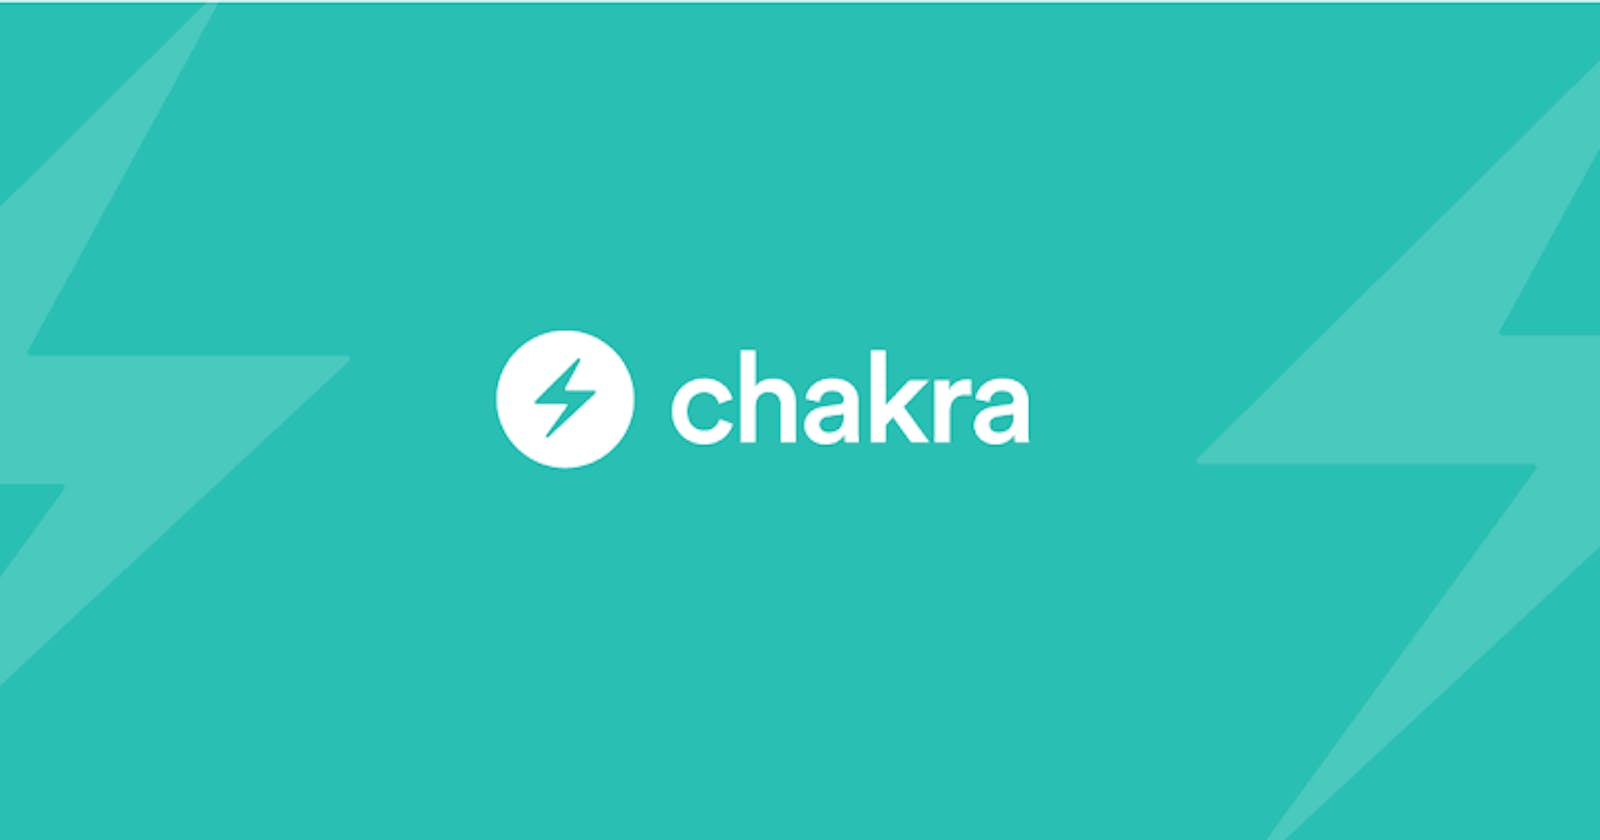 Getting started with Chakra UI